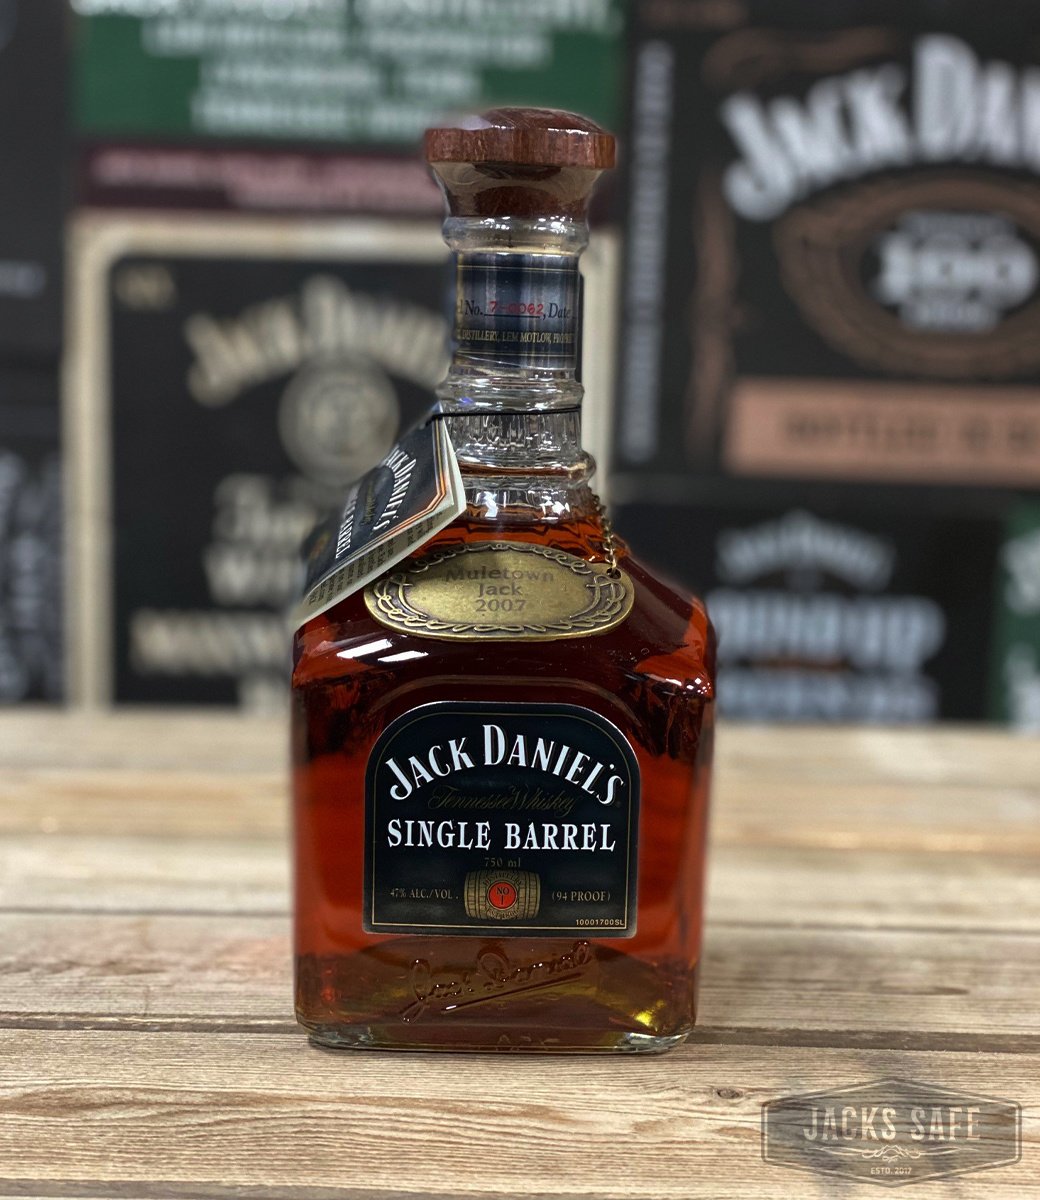 JACK DANIEL'S - Single Barrel - Select - Personal Collection - Muletown Jack 2007 - SIGNED BY JIMMY